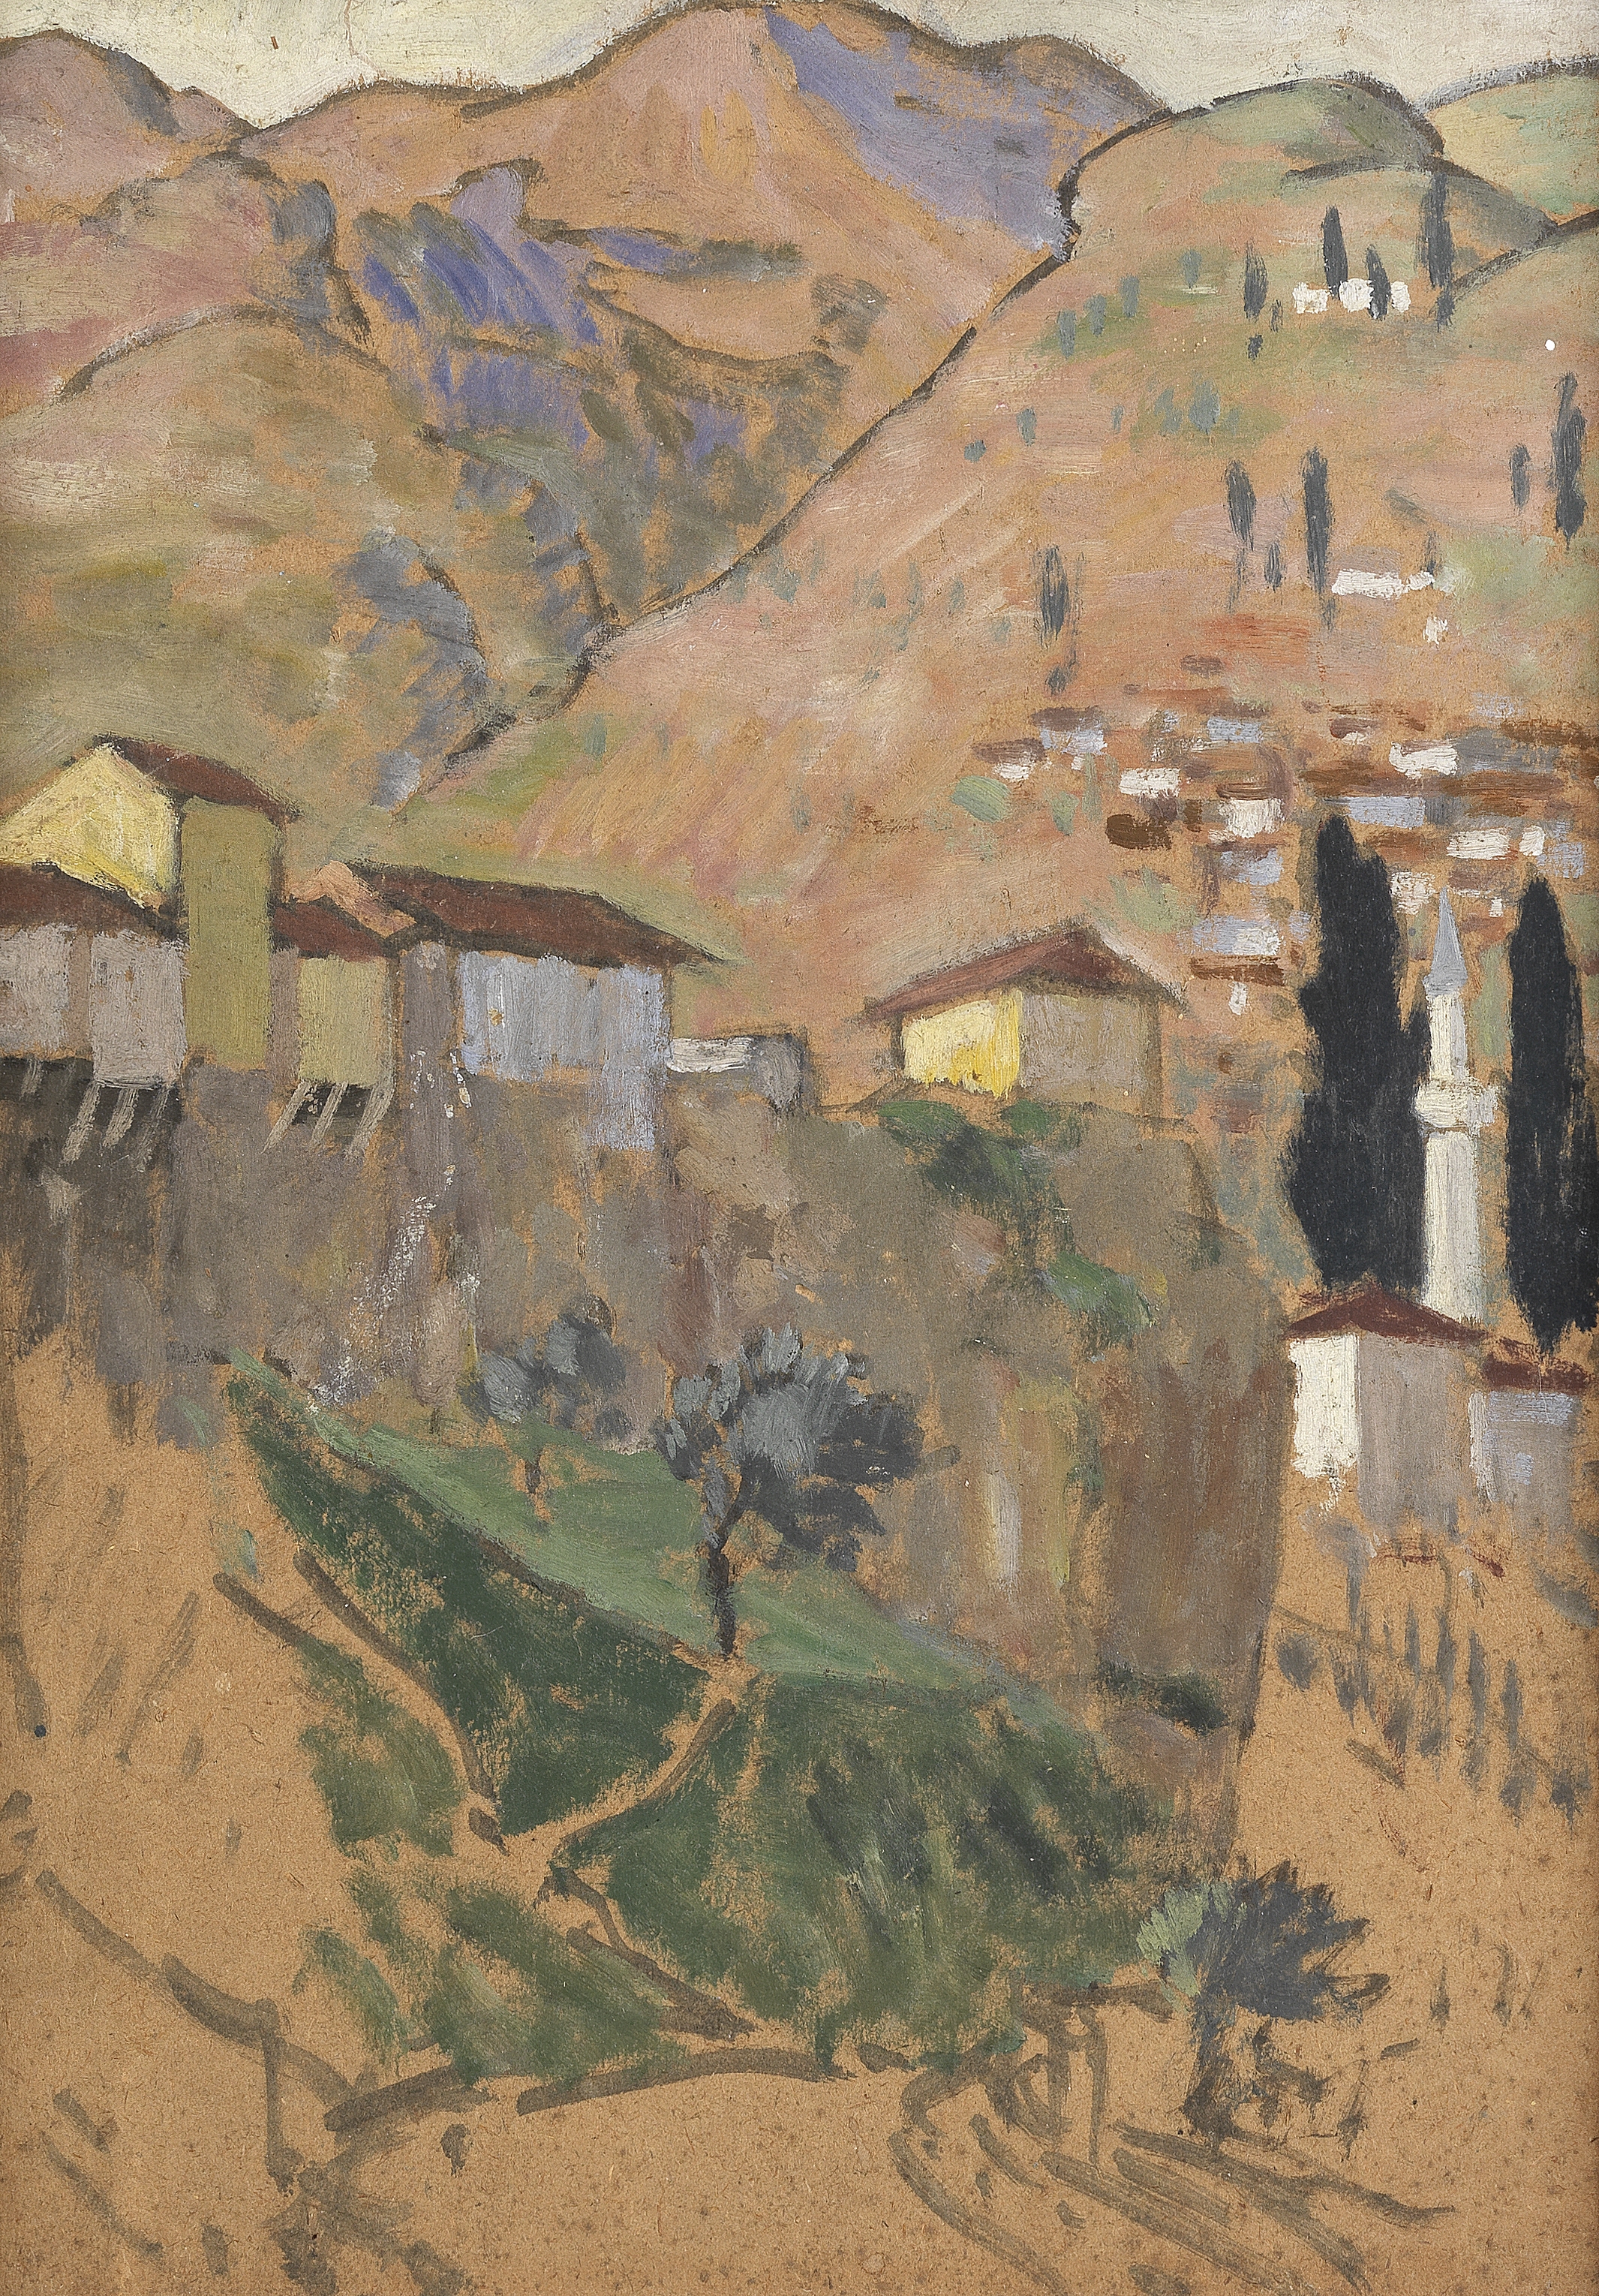 Roger Fry (British, 1866-1934) Ravine with Houses, Broussa (Painted in 1911)